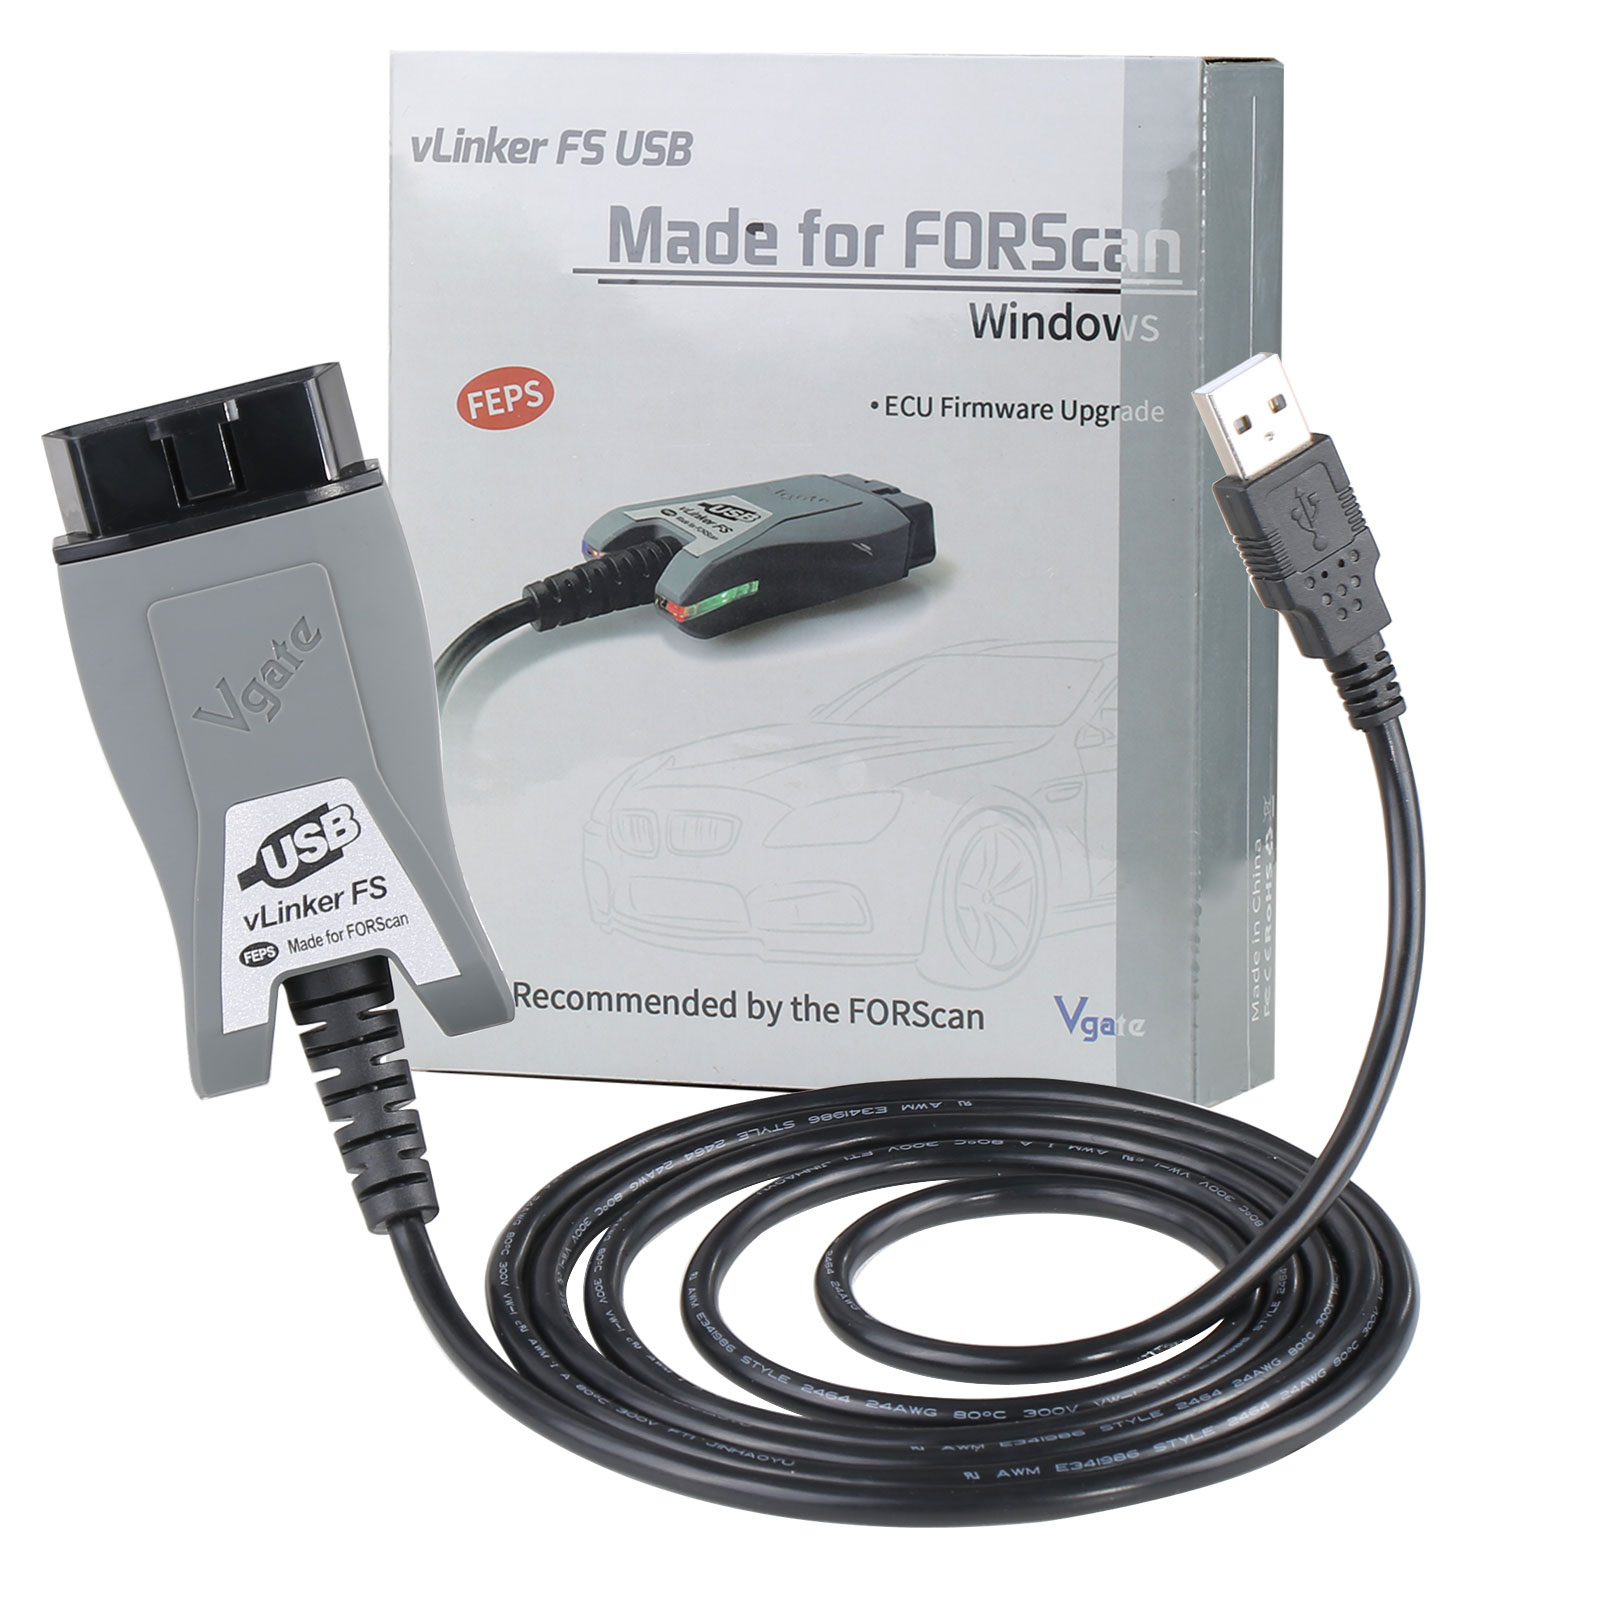  FORScan ELM327 OBD2 USB Adapter for Windows, Diagnostic Coding  Tool with MS-CAN/HS-CAN Switch for Ford Lincoln Mazda Mercury Series  Vehicles : Automotive